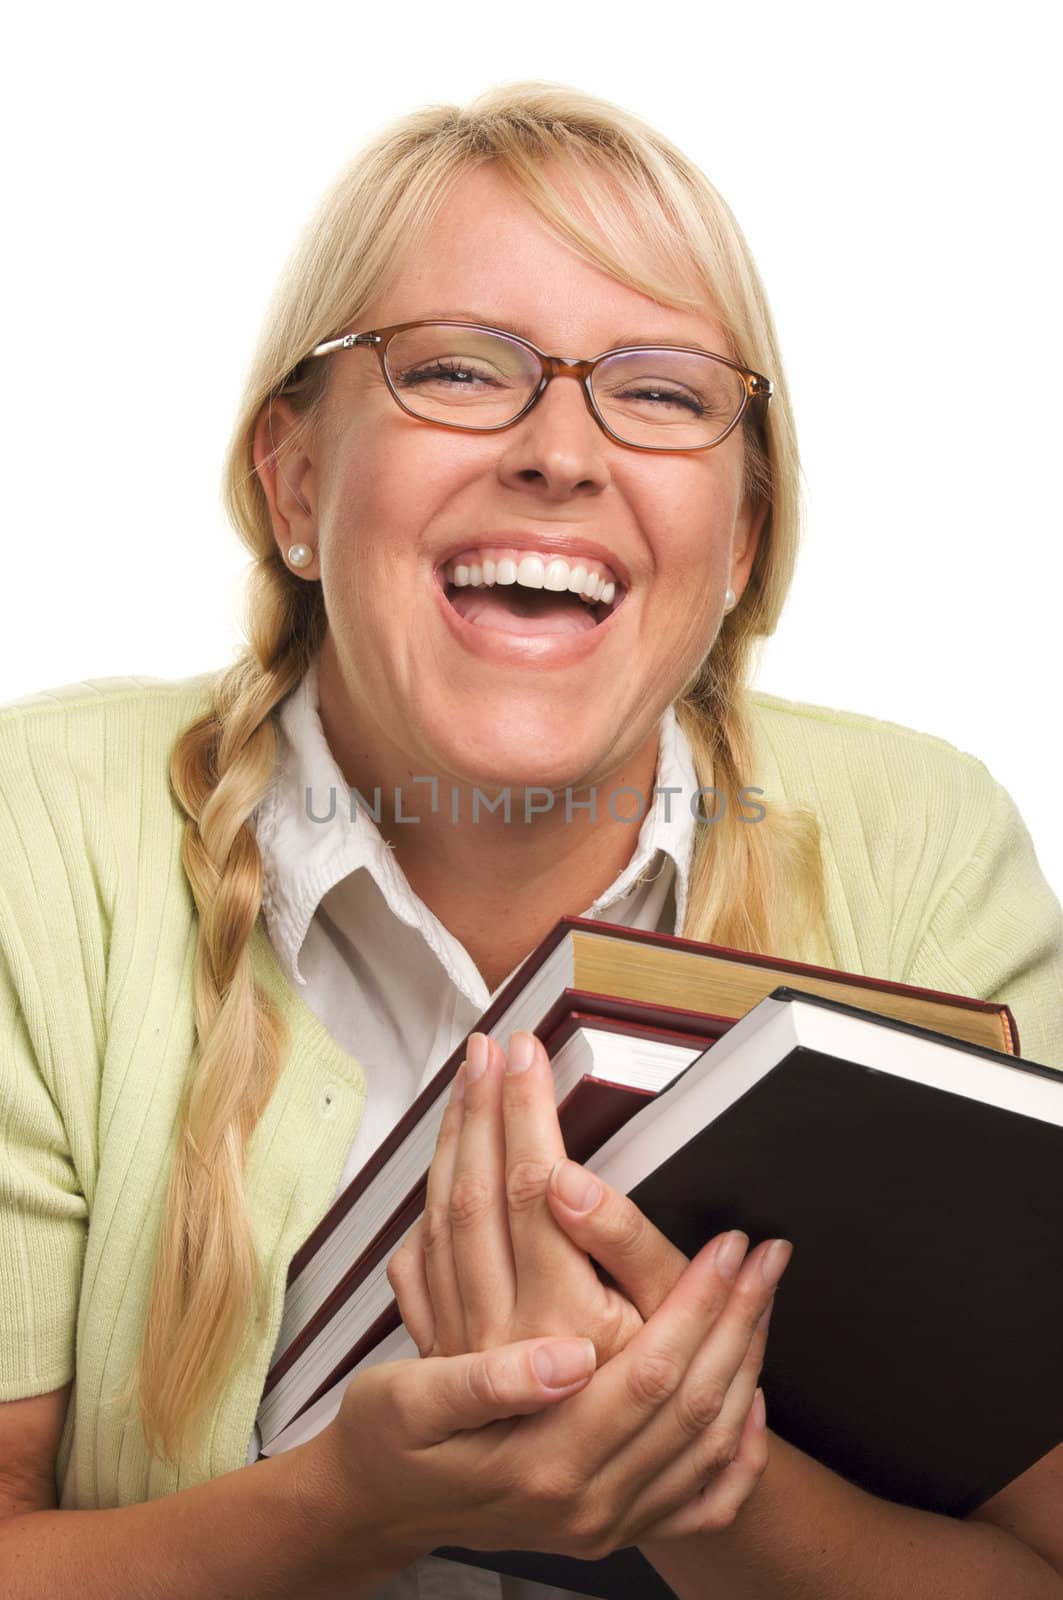 Attractive Student Carrying Her Books Isolated on a White Background.